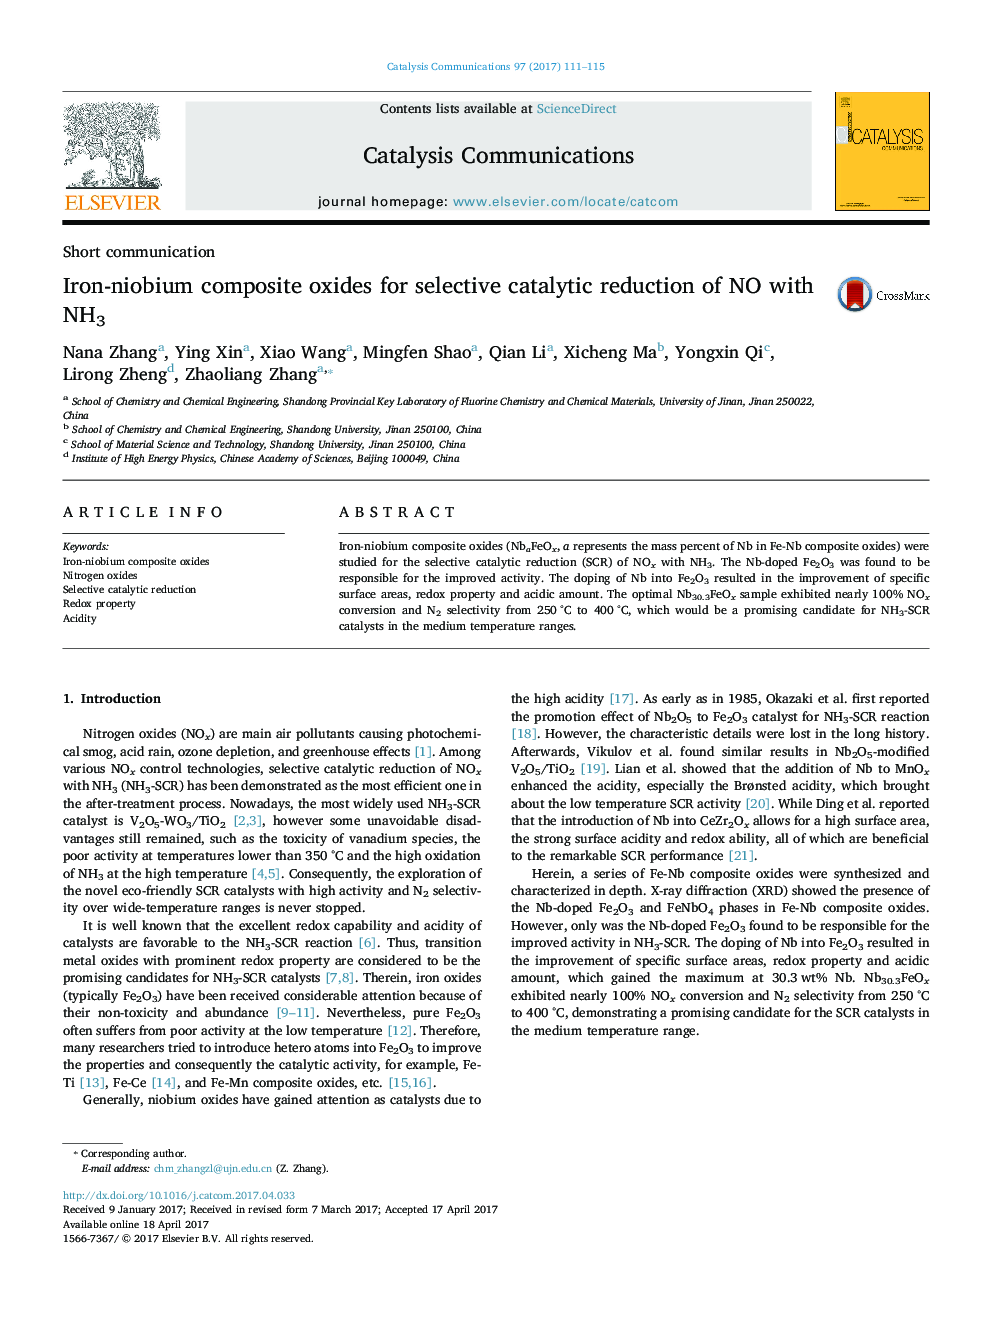 Iron-niobium composite oxides for selective catalytic reduction of NO with NH3